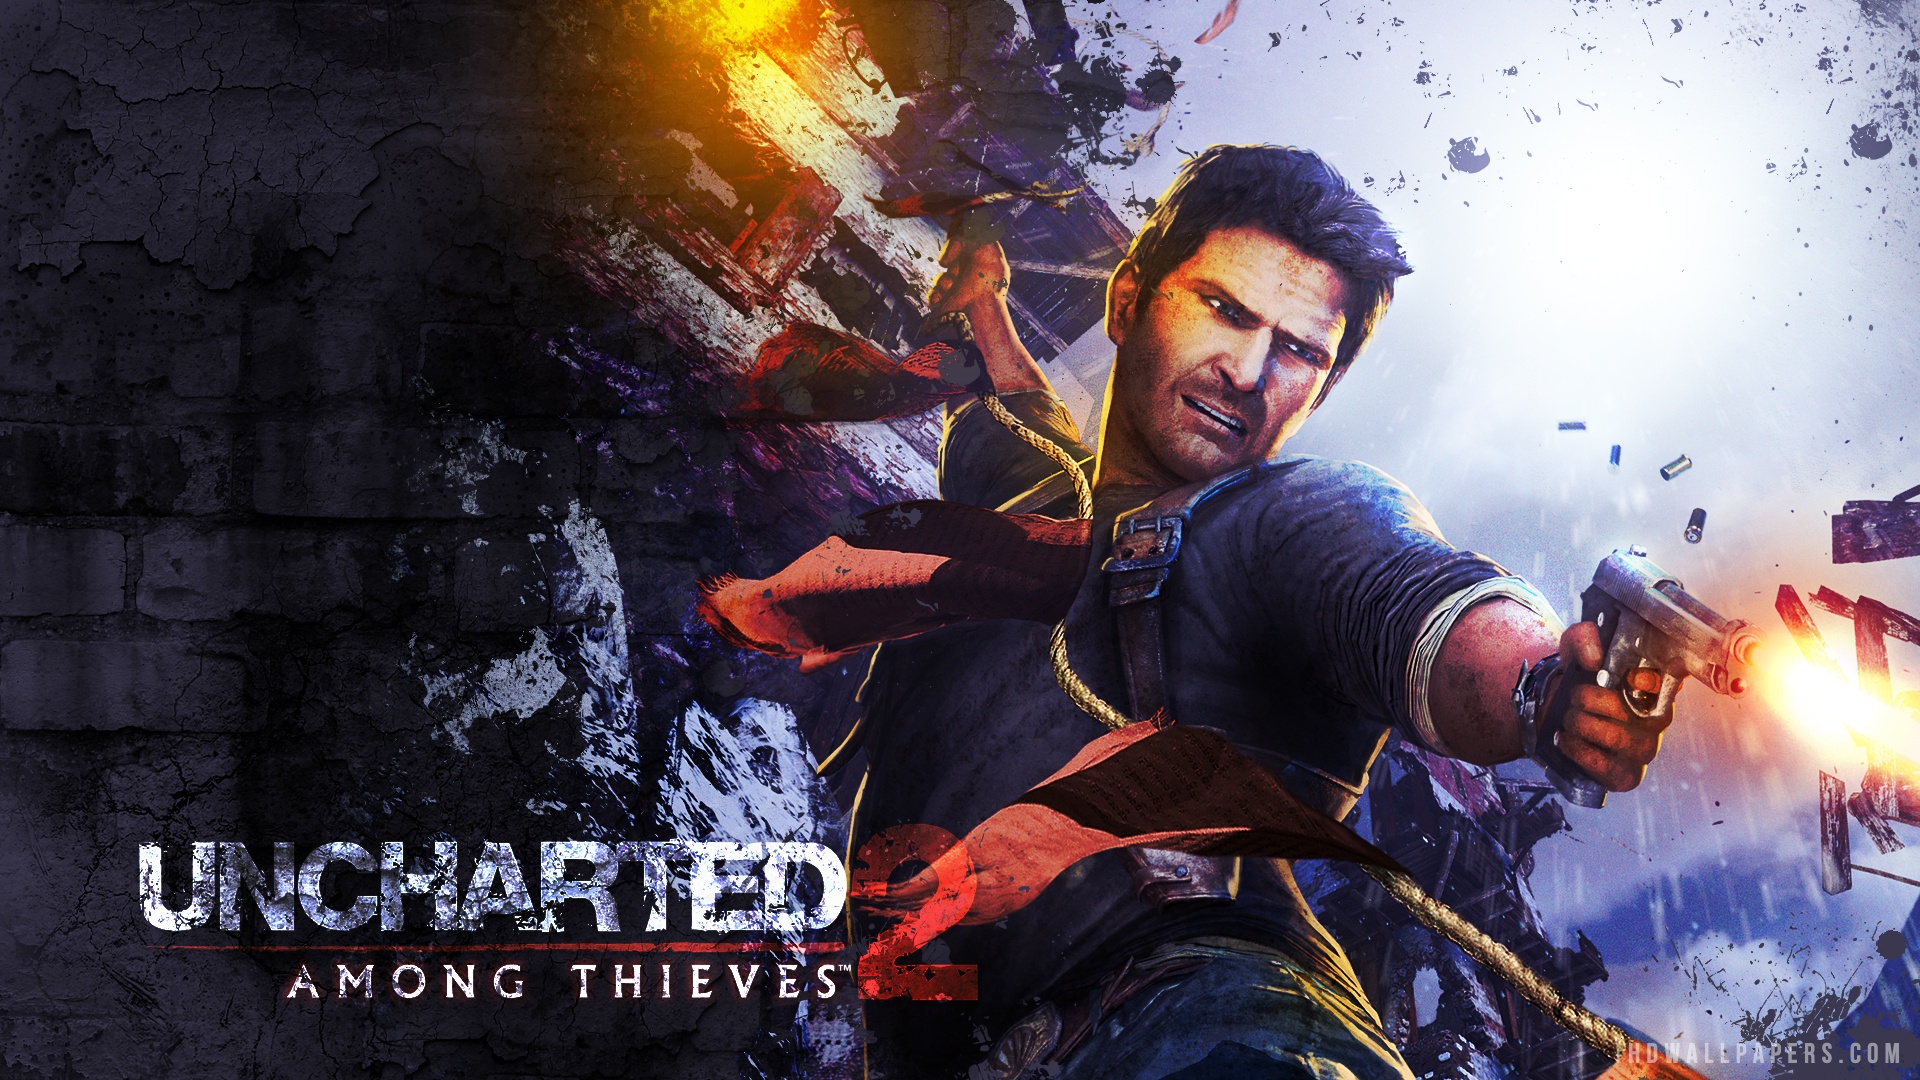 Uncharted Wallpapers Hd Wallpaper - Uncharted 2 Among The Thieves - HD Wallpaper 